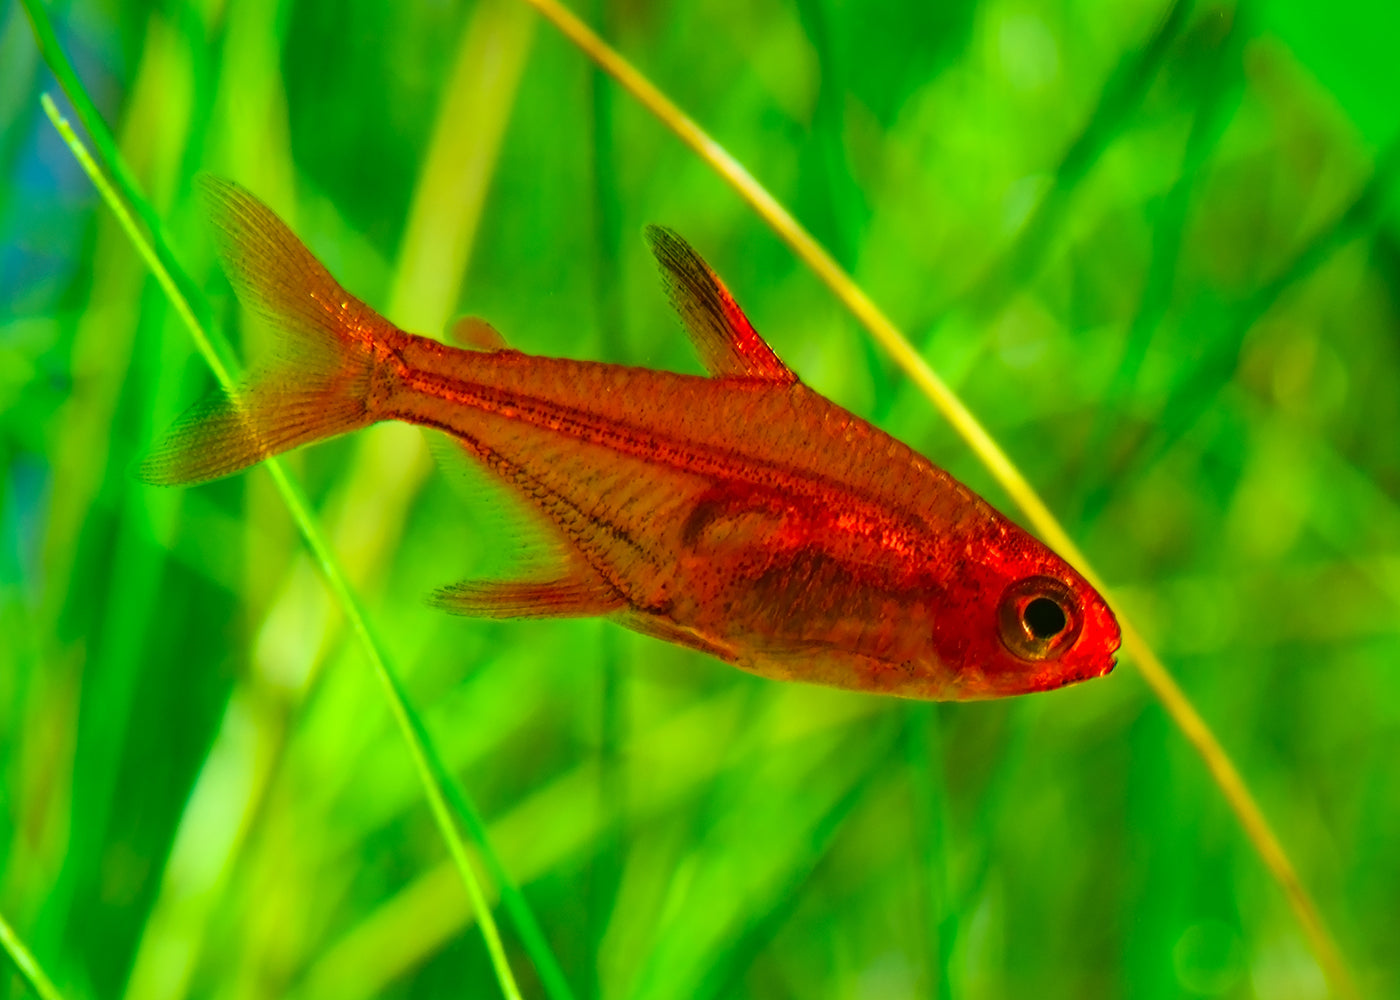 Small red transparent fish called Ember Tetra showing bones and organs